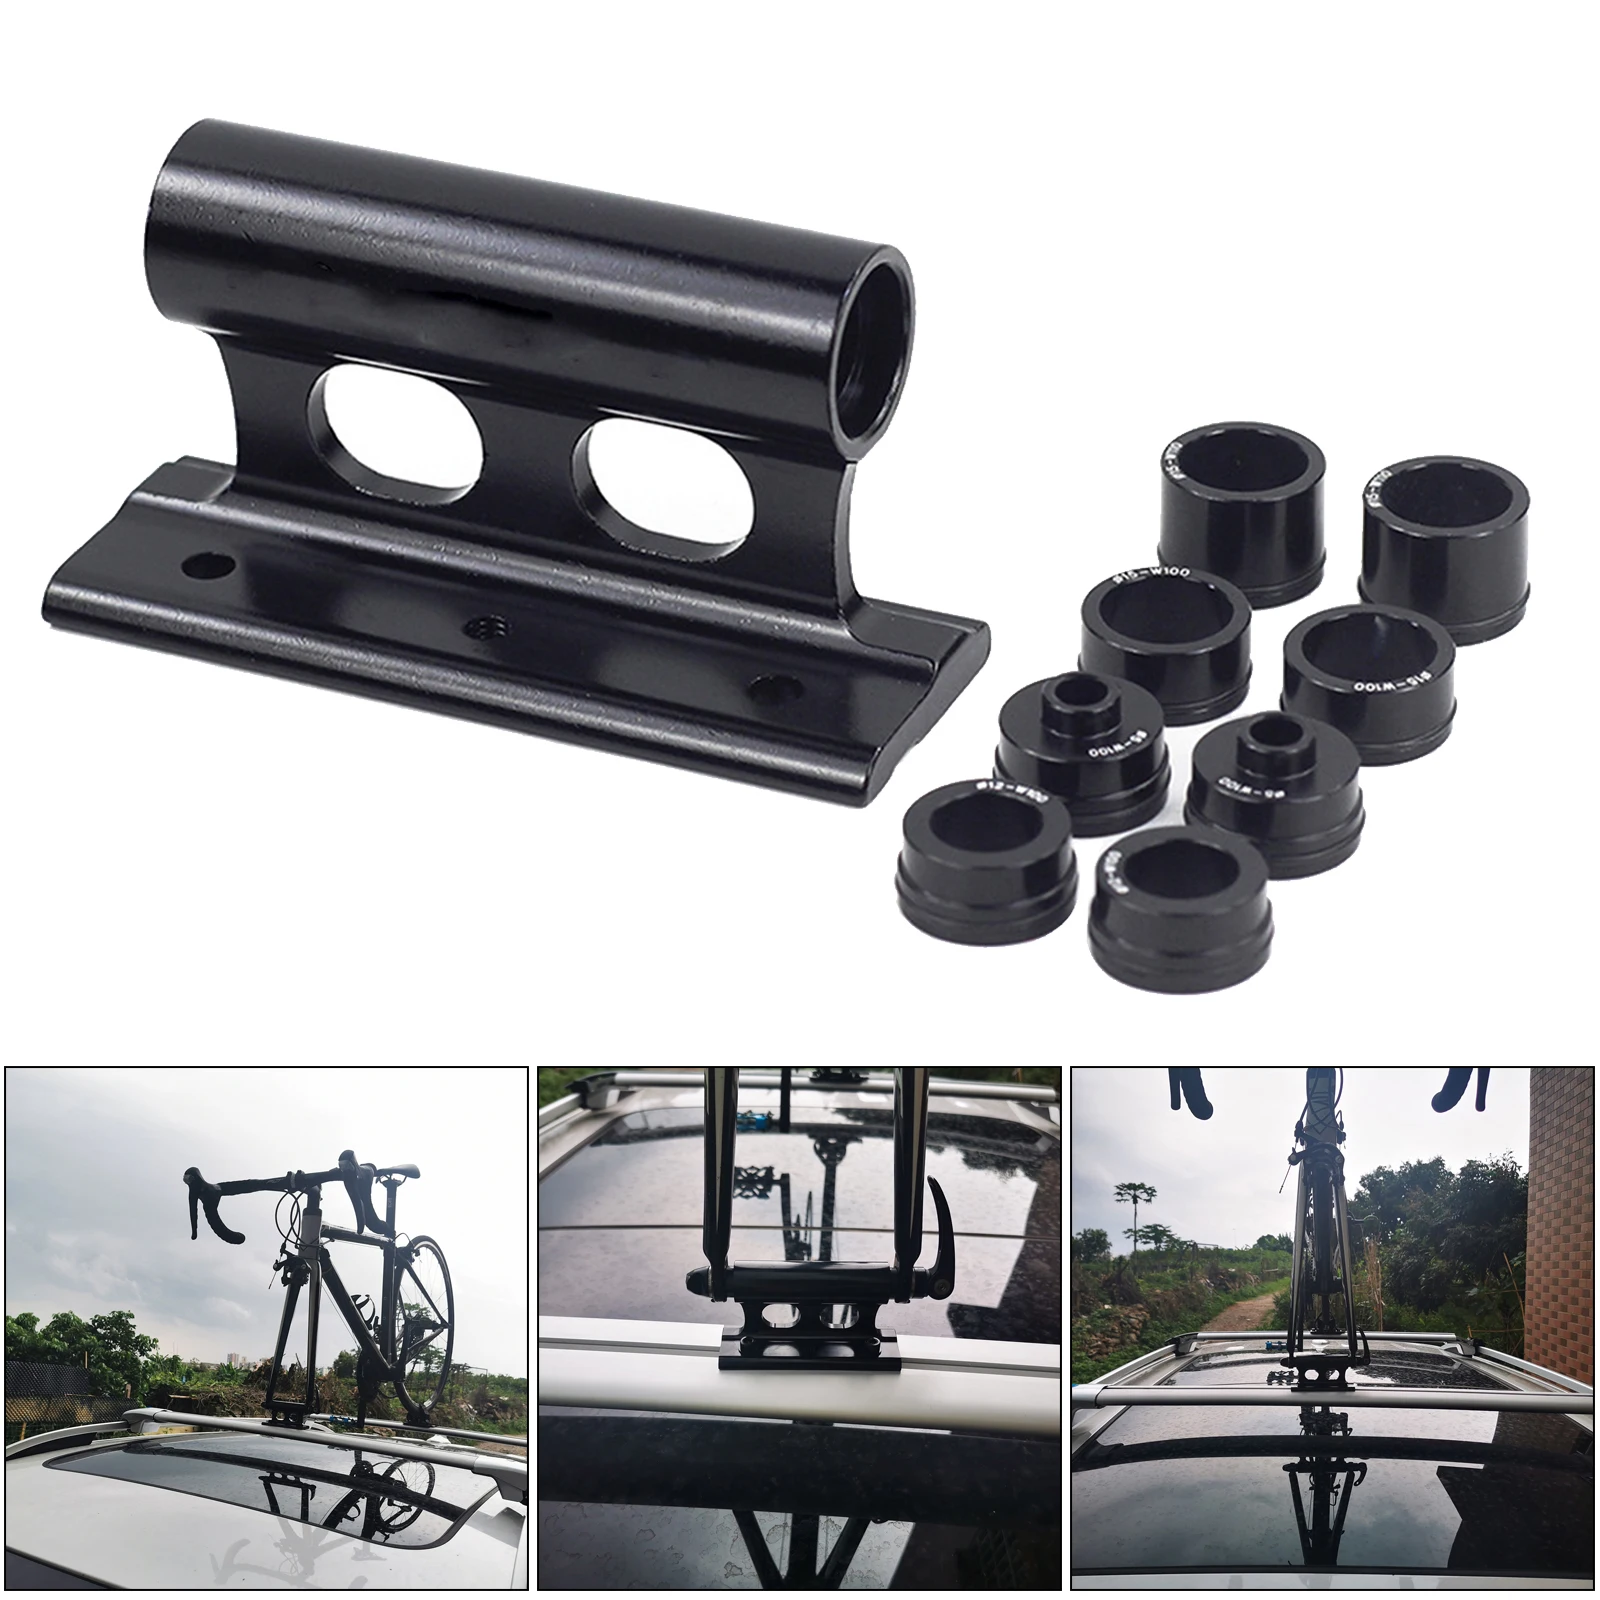 Alloy Bike Car Roof Mount Bicycle SUV Truck Bed Block Rack Quick Release 15x100/110mm M12x100mm Thru Axle Carrier Holder